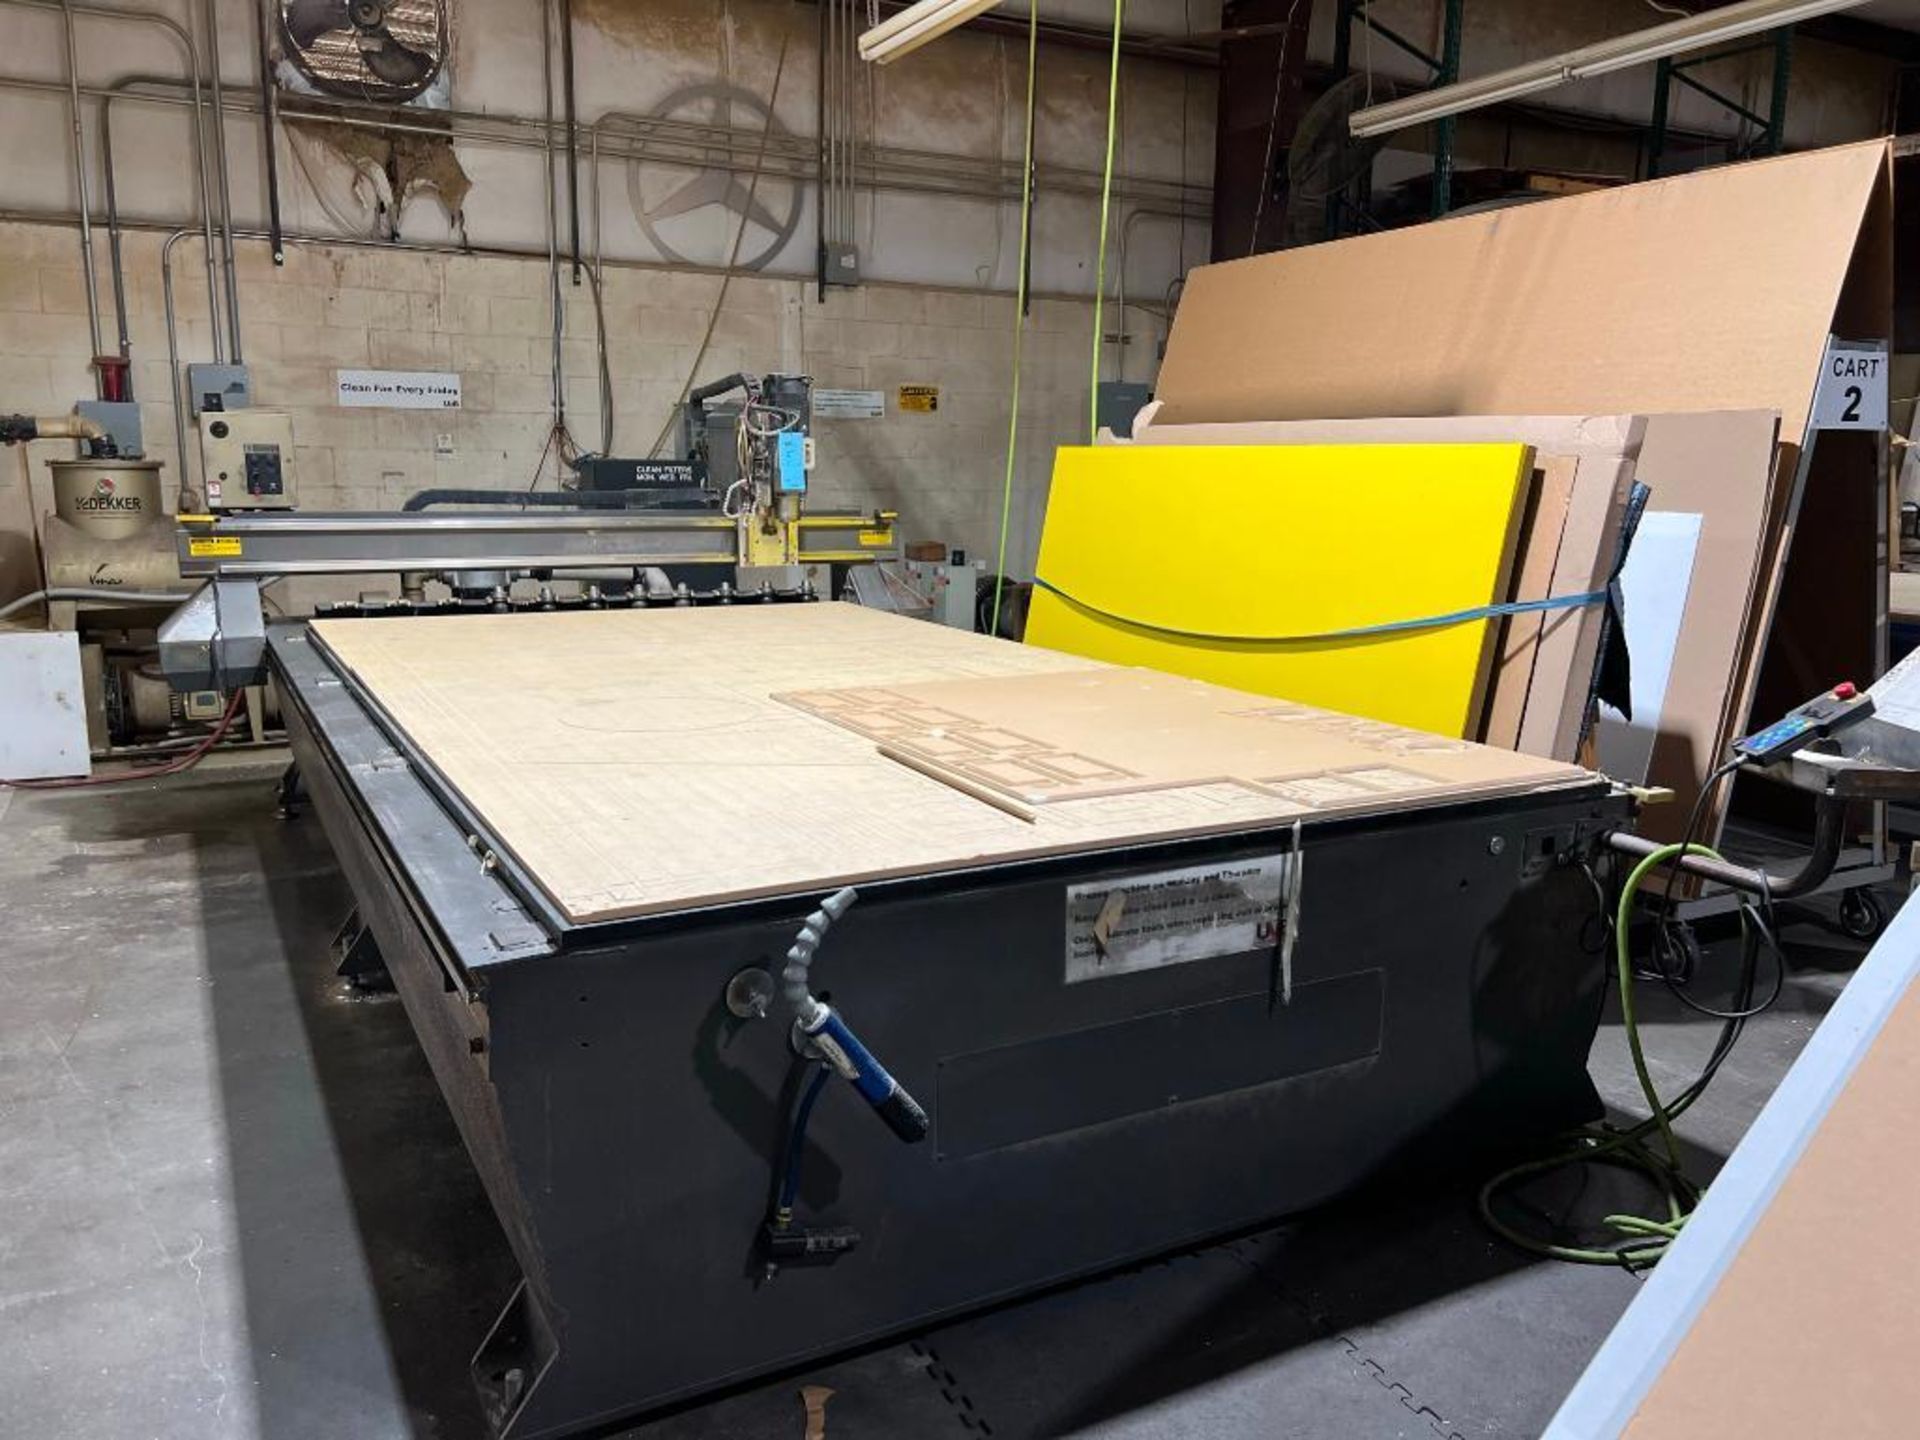 Multicam CNC Router Model 3305-R, S/N 3-305-R05361, 6' x 12' Table, with Tooling, Pendant Controls,